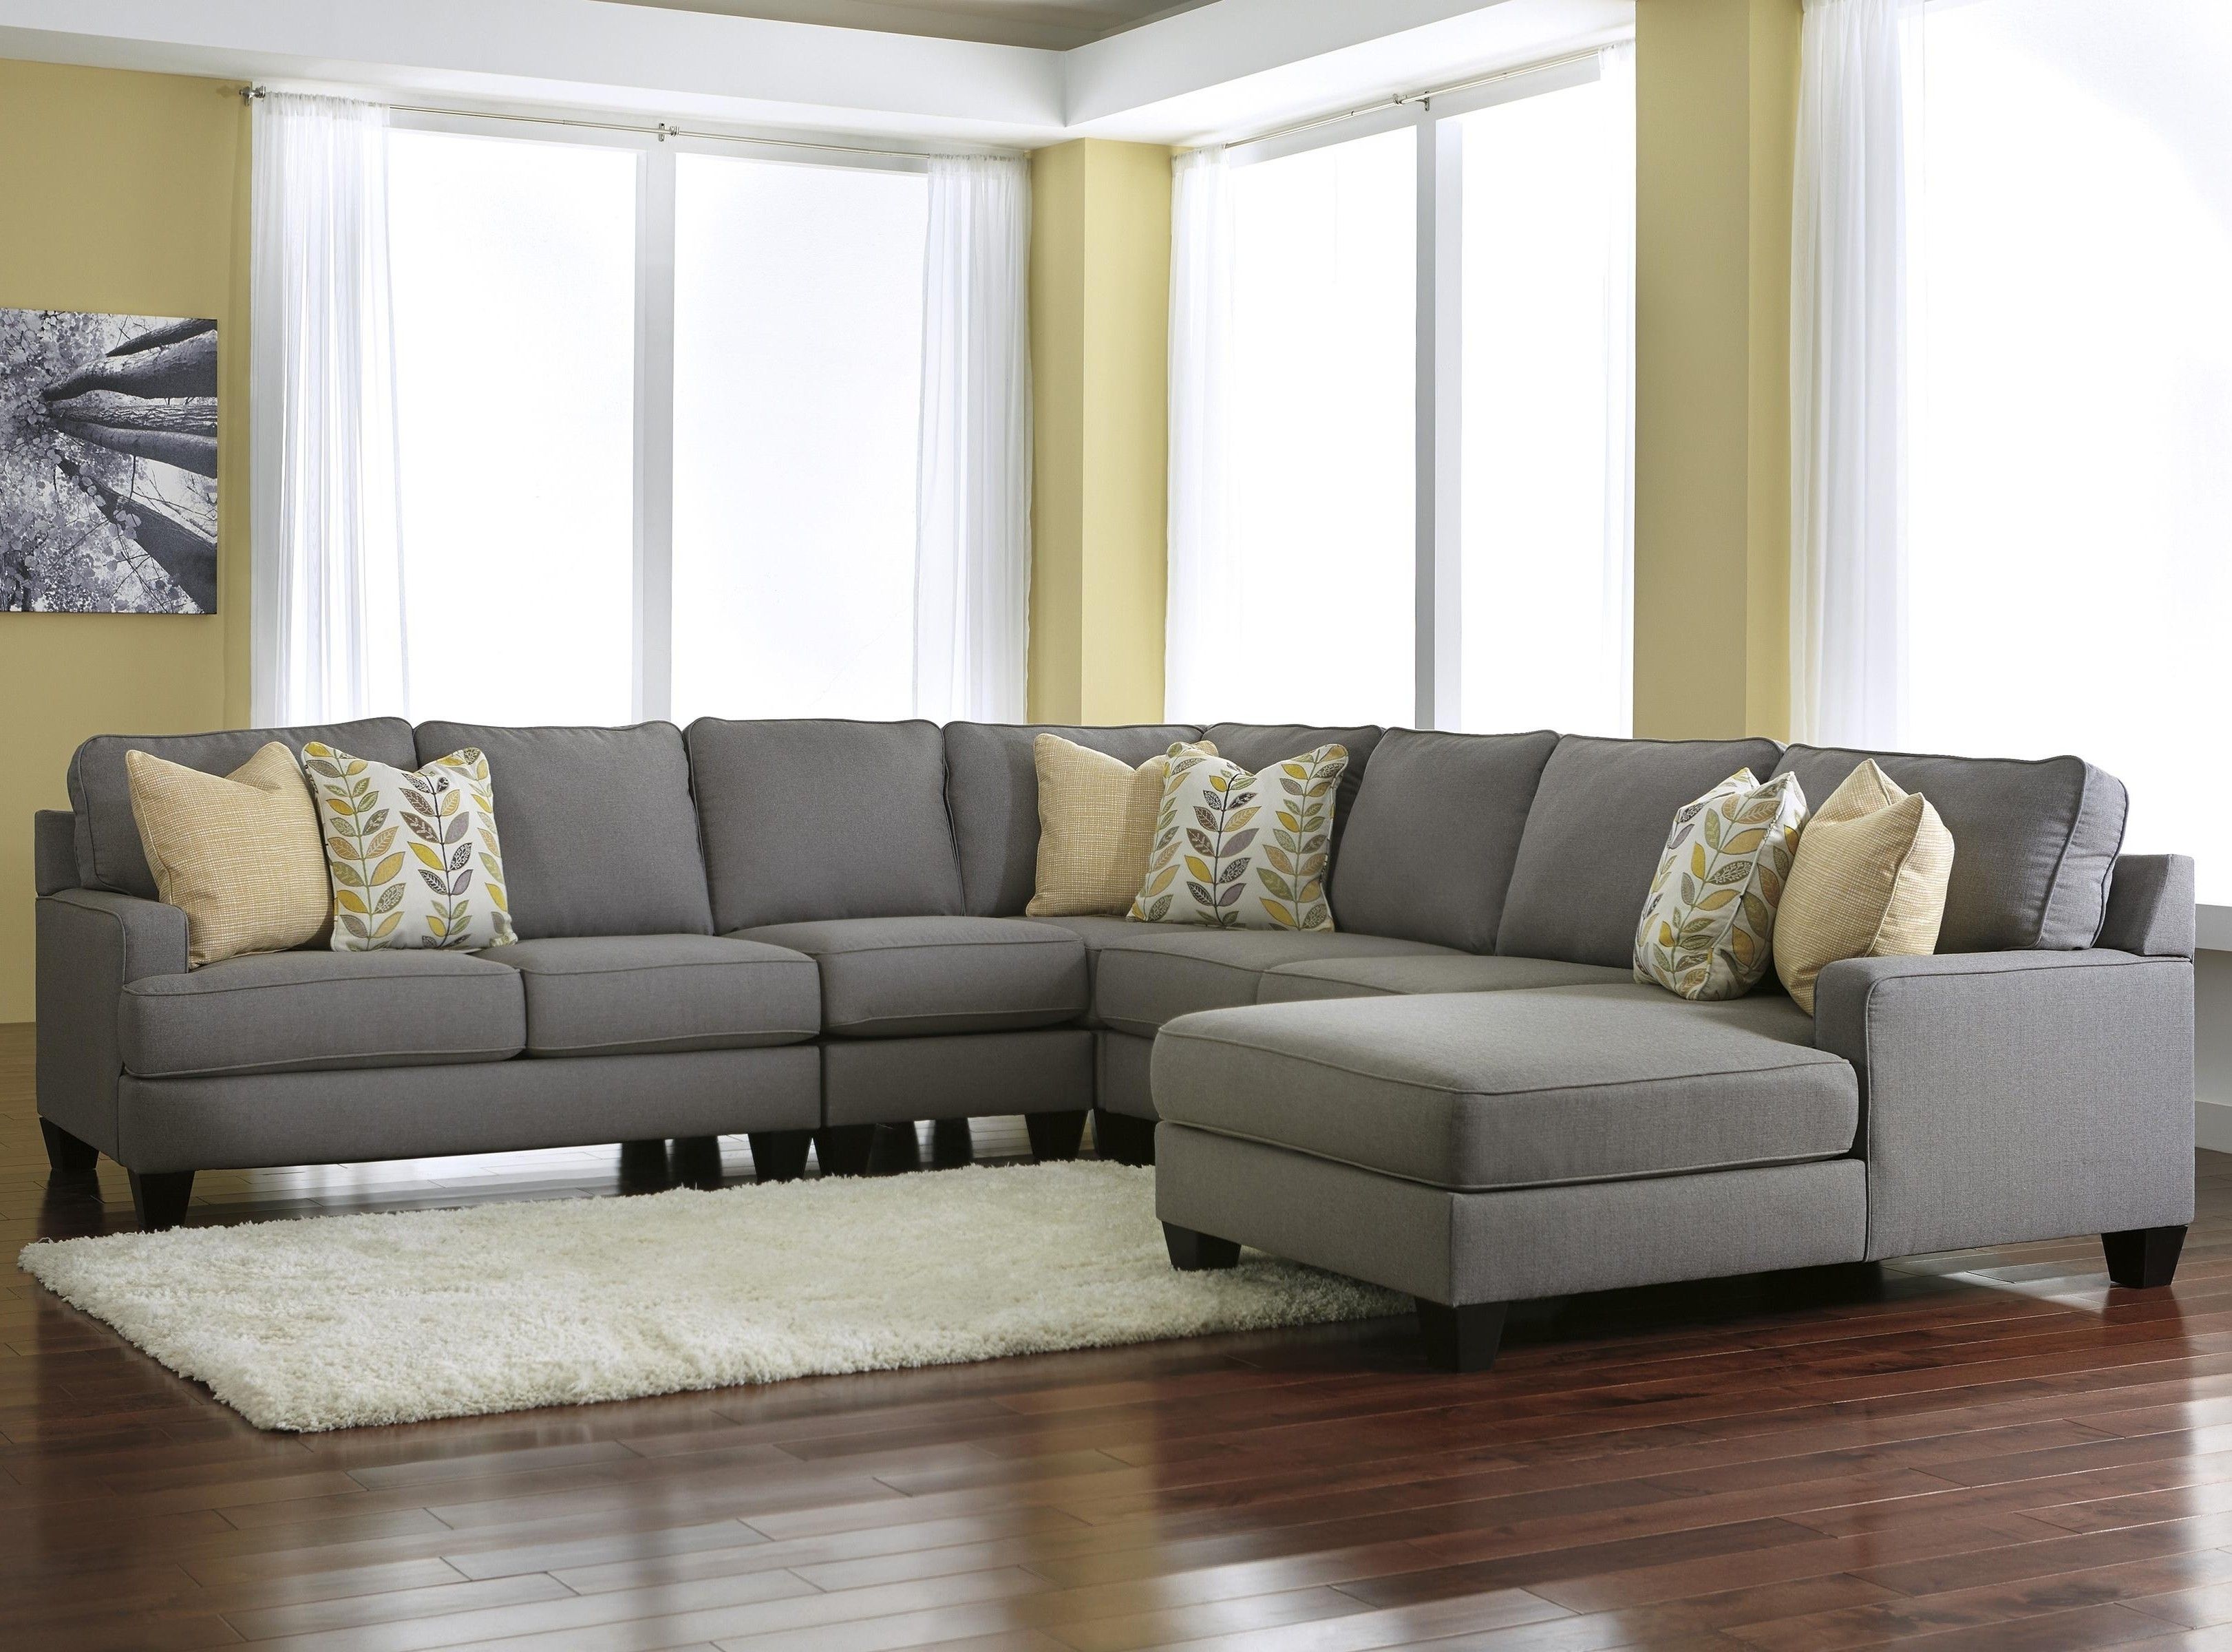 Unique Sectional Sofa Mn – Buildsimplehome Regarding St Cloud Mn Sectional Sofas (View 4 of 10)